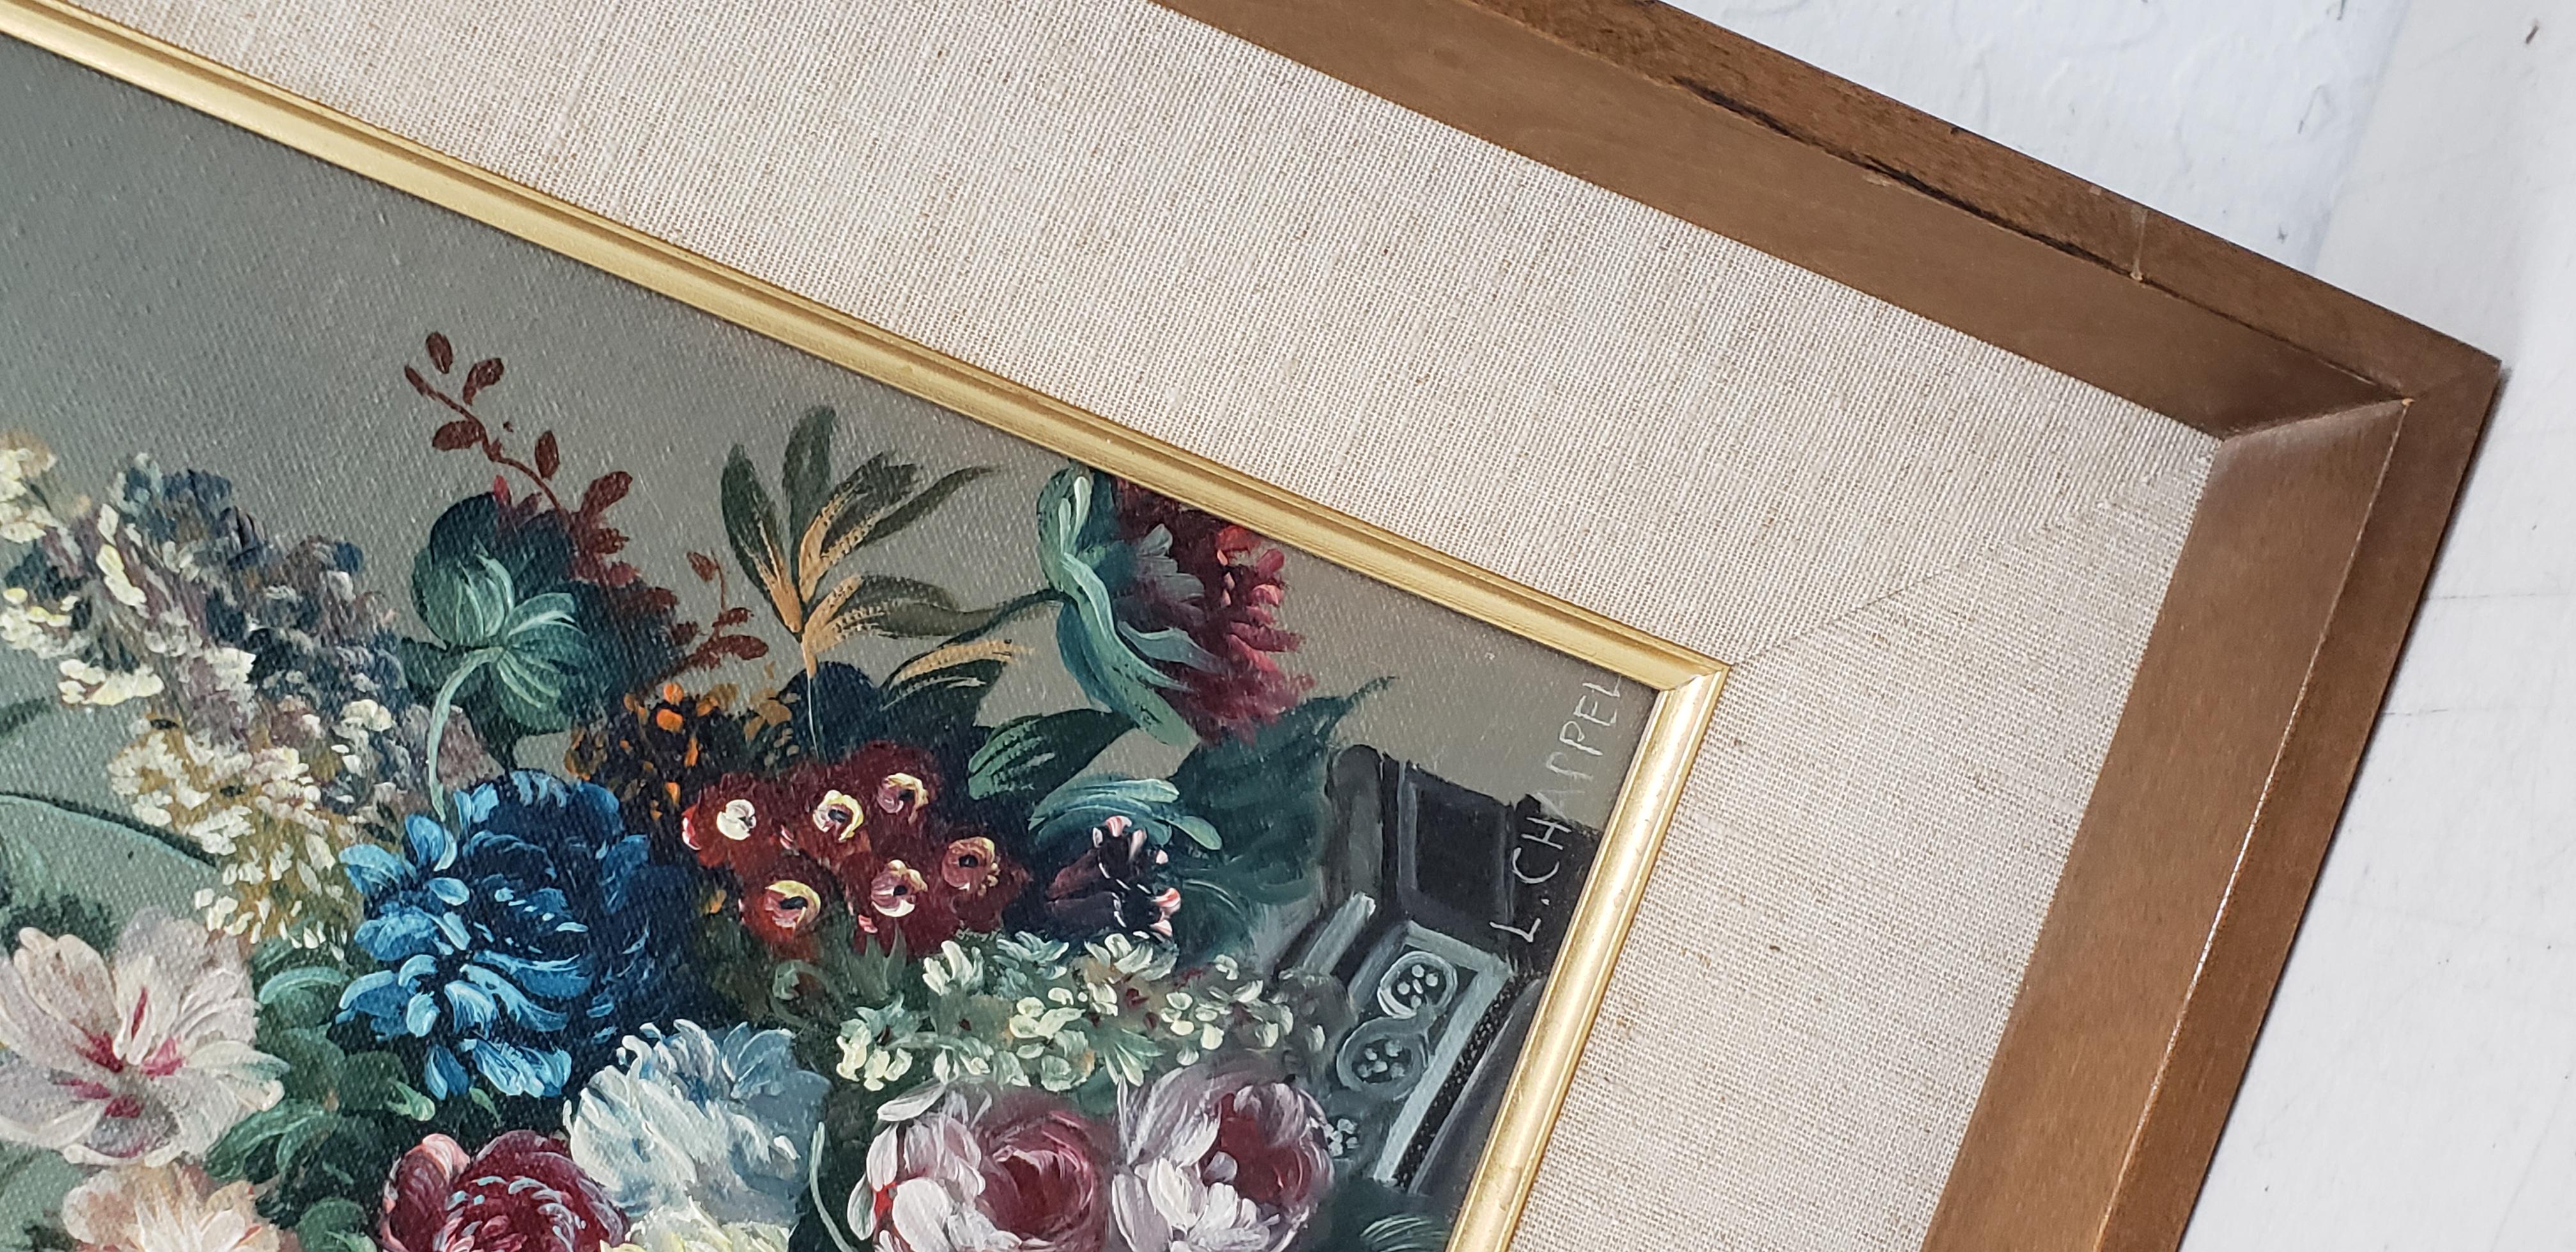 Louis Emiel Chappel (1888-1963) floral still life oil painting, circa 1950s

Beautiful full basket bouquet of flowers on a pedestal by listed artist Louis Chappel.

Original oil on canvas. Dimensions 8.5